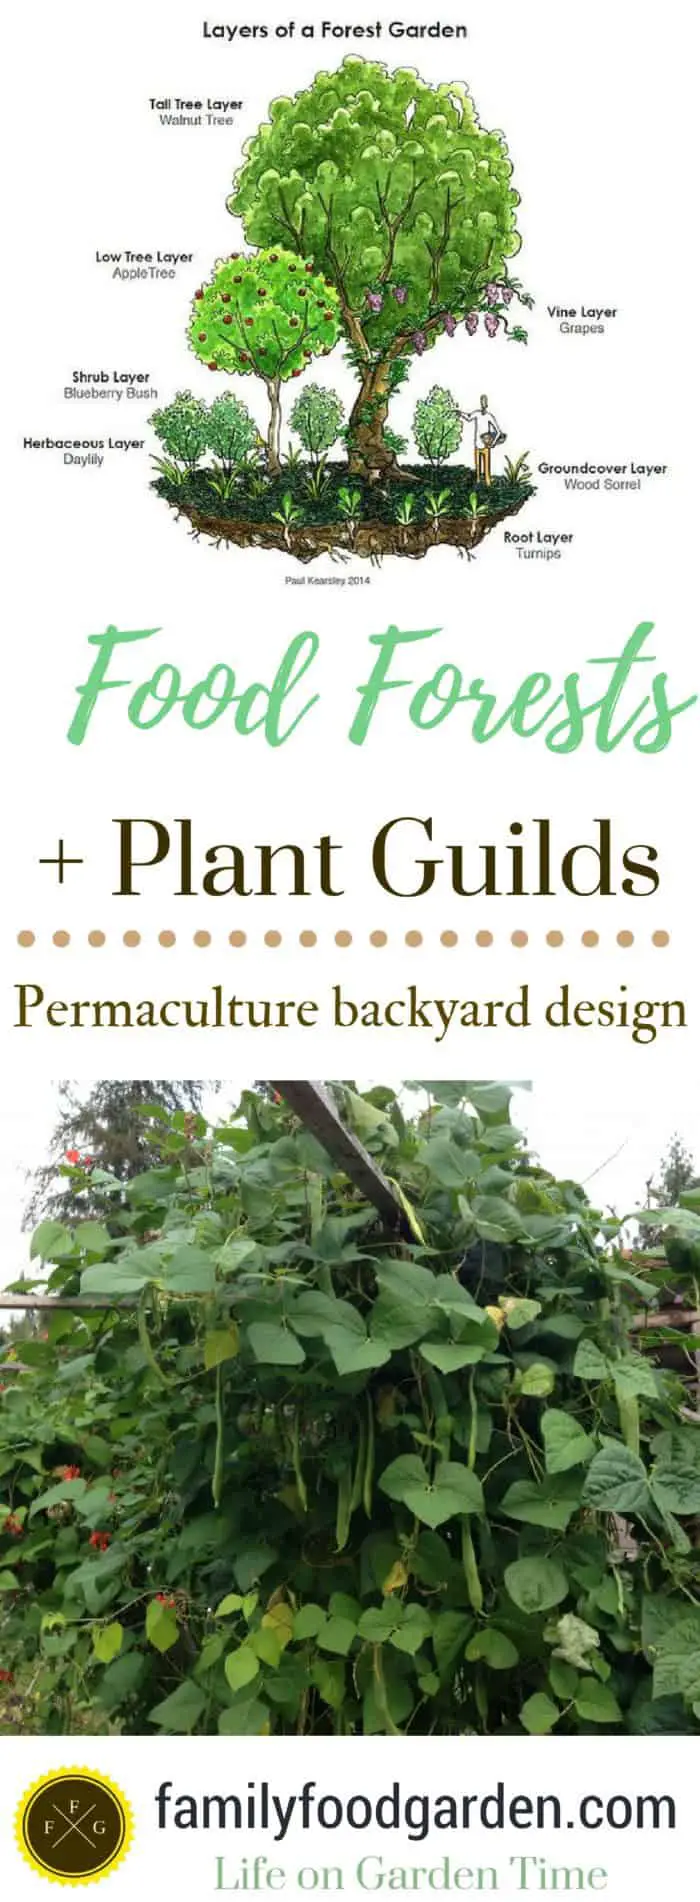 Food Forests + Plant Guilds: Permaculture Backyard Design